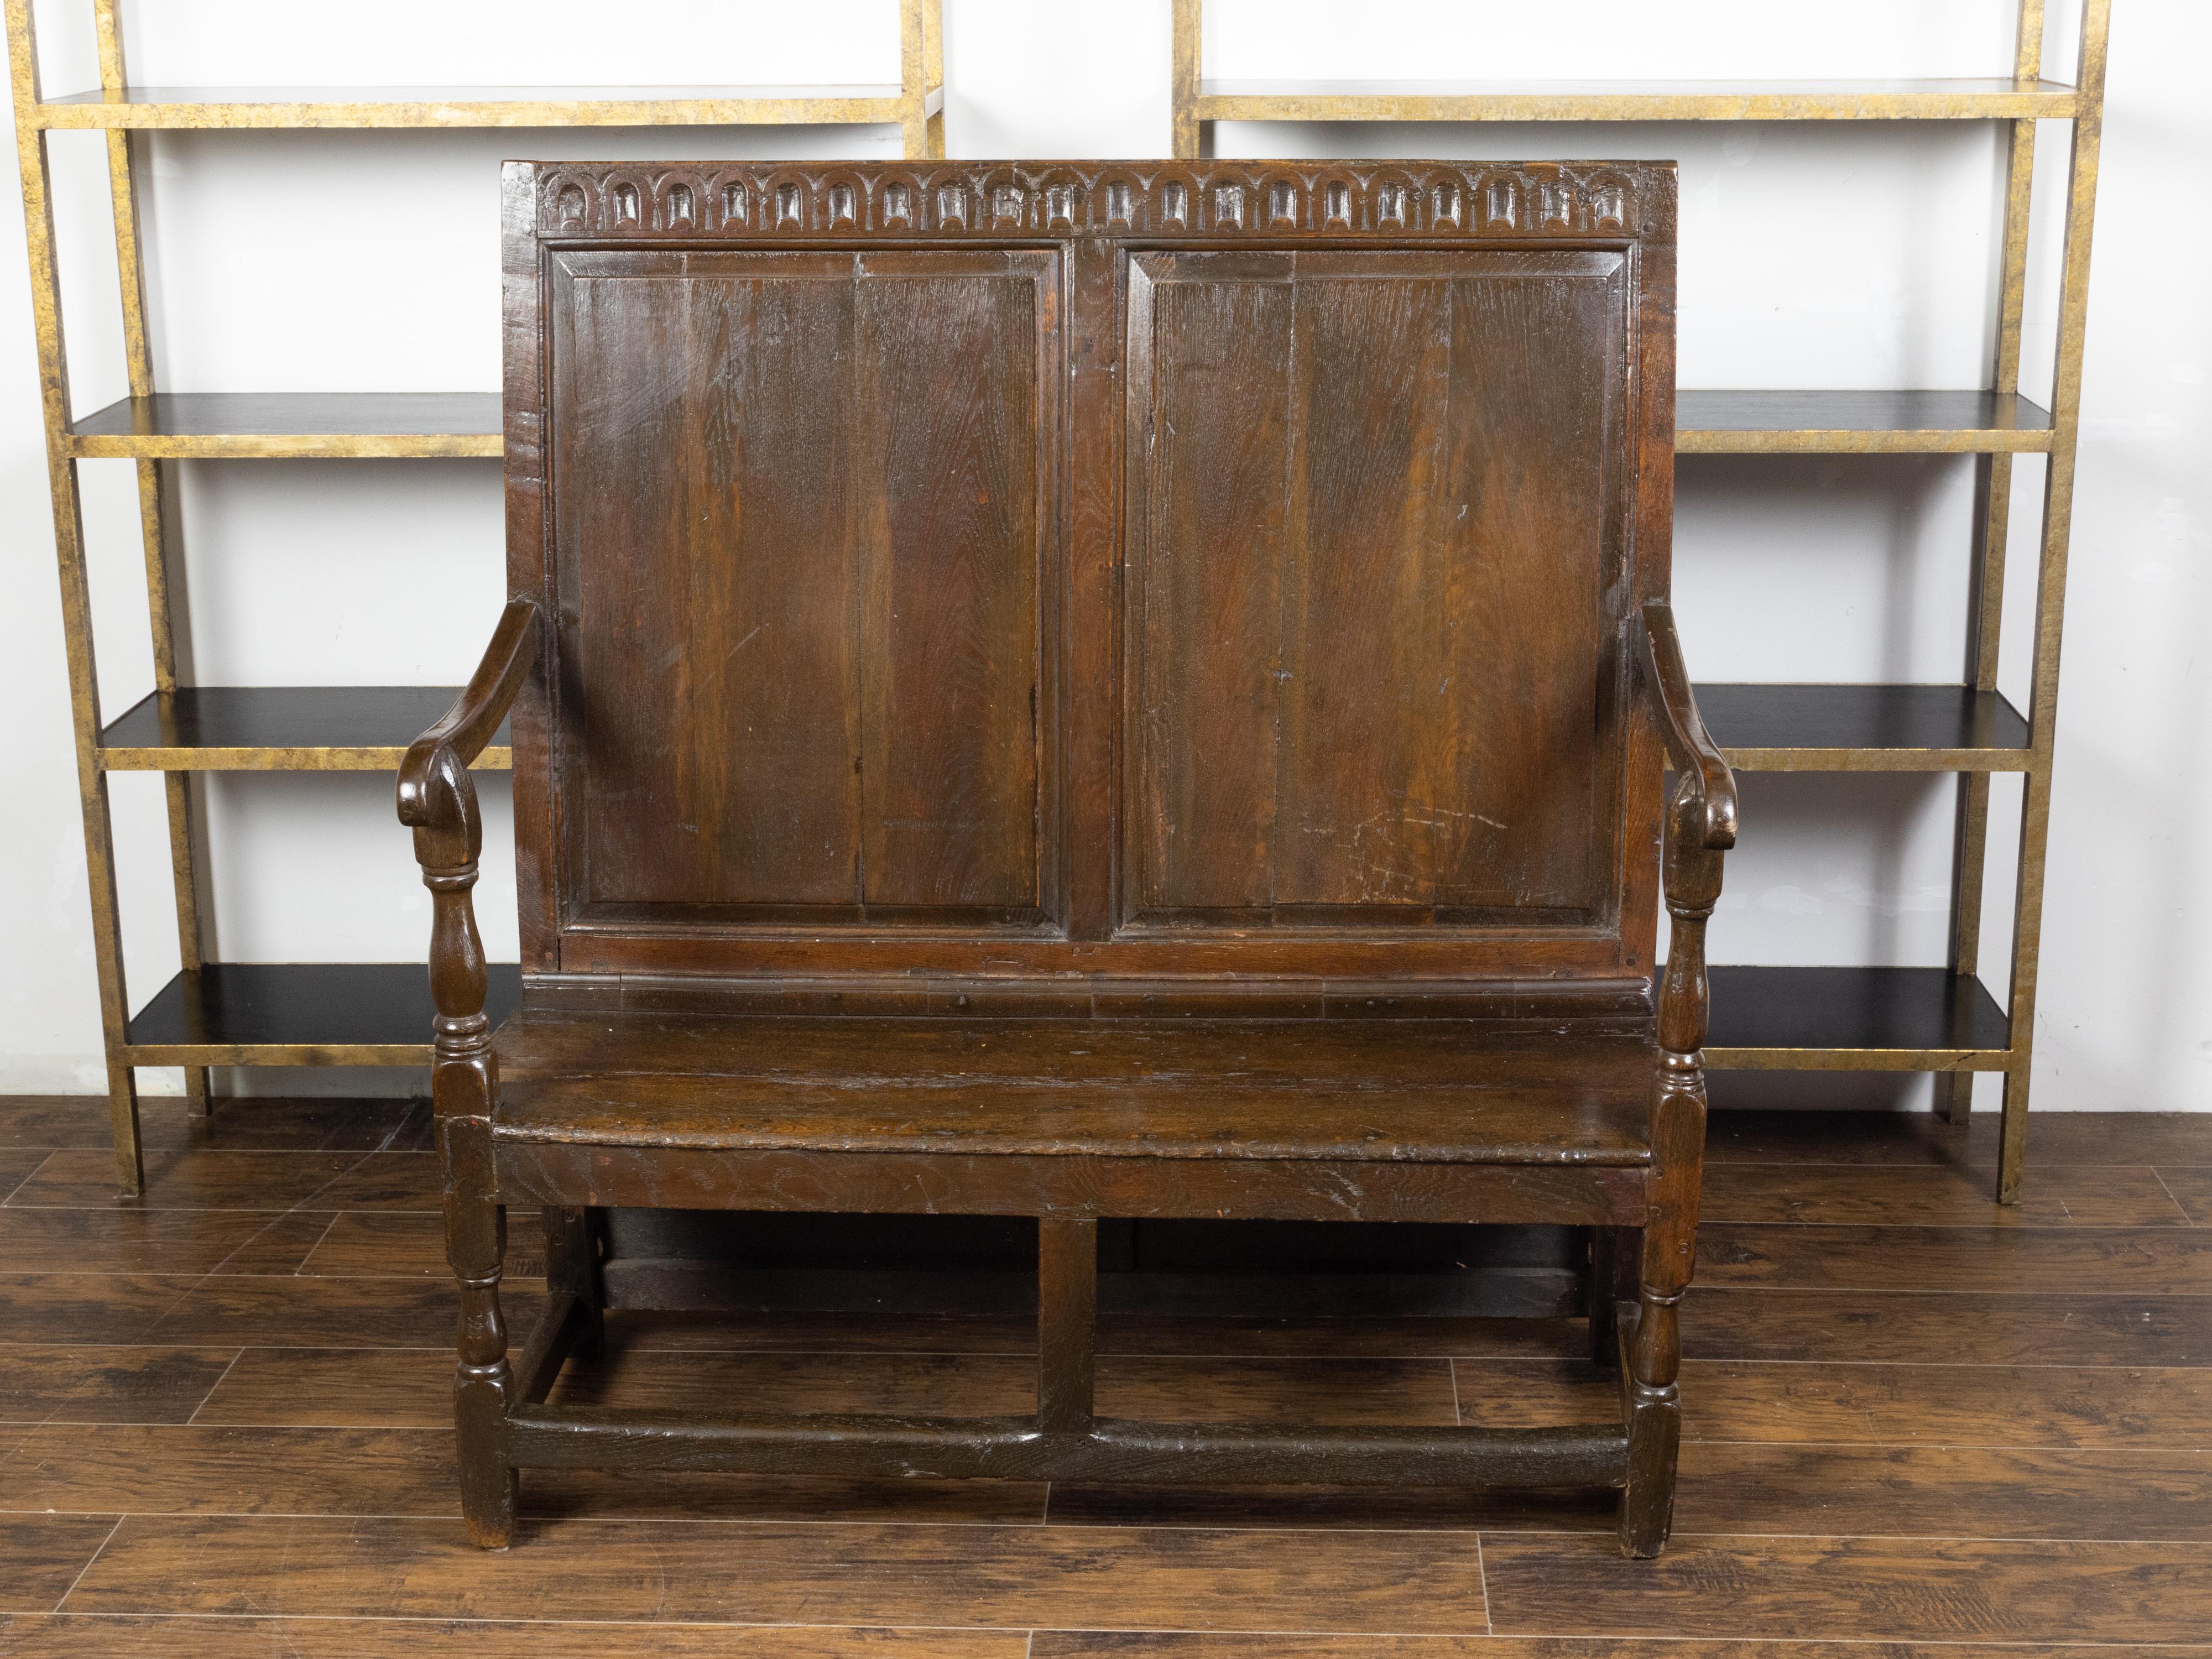 An English oak bench from the late 19th century, with carved frieze and scrolling arms. Created in England during the third quarter of the 19th century, this oak bench captures our attention with its nicely rustic appearance and simple lines.